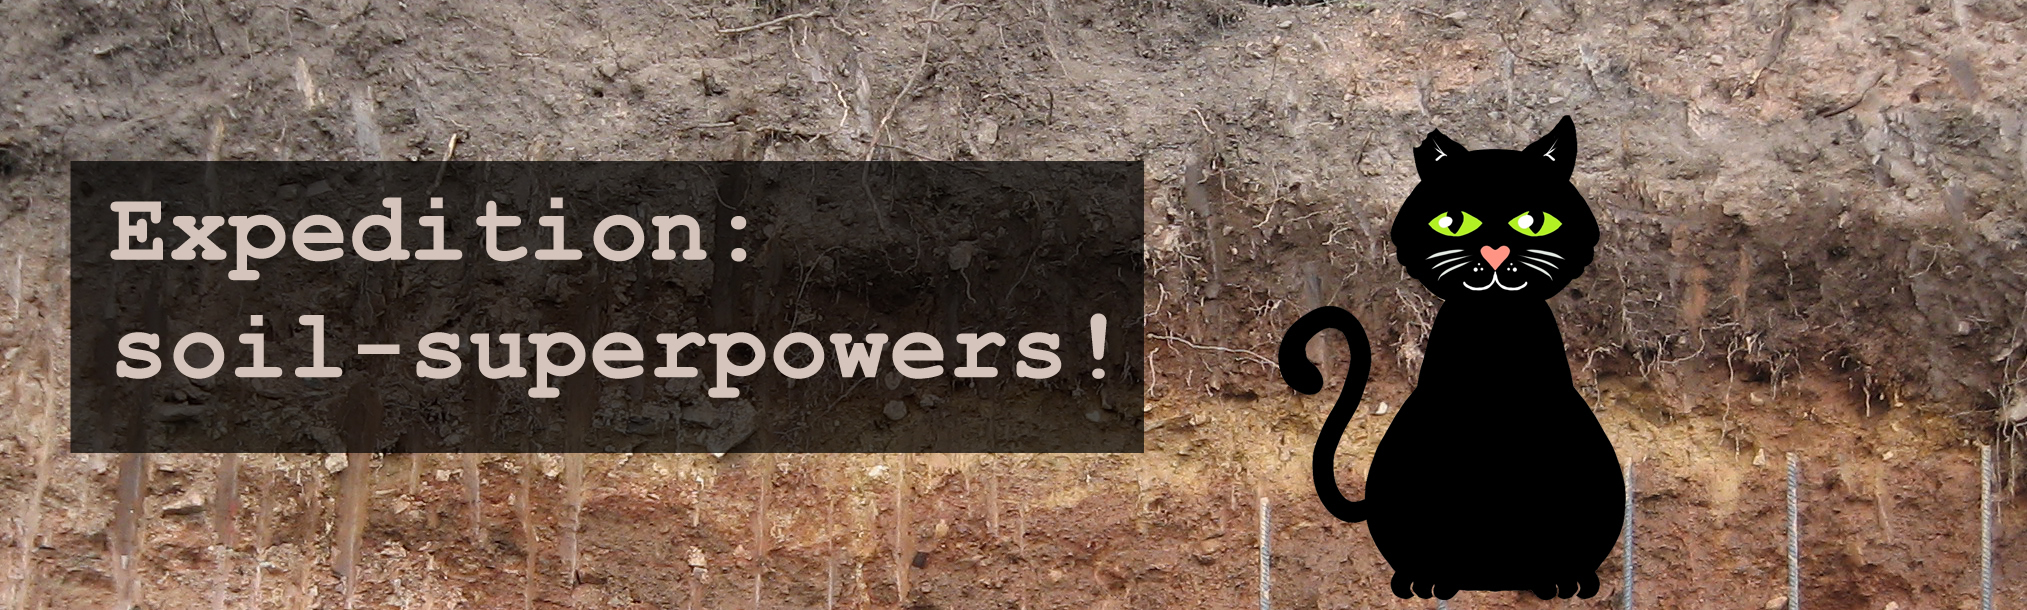 Expedition: soil-superpowers!